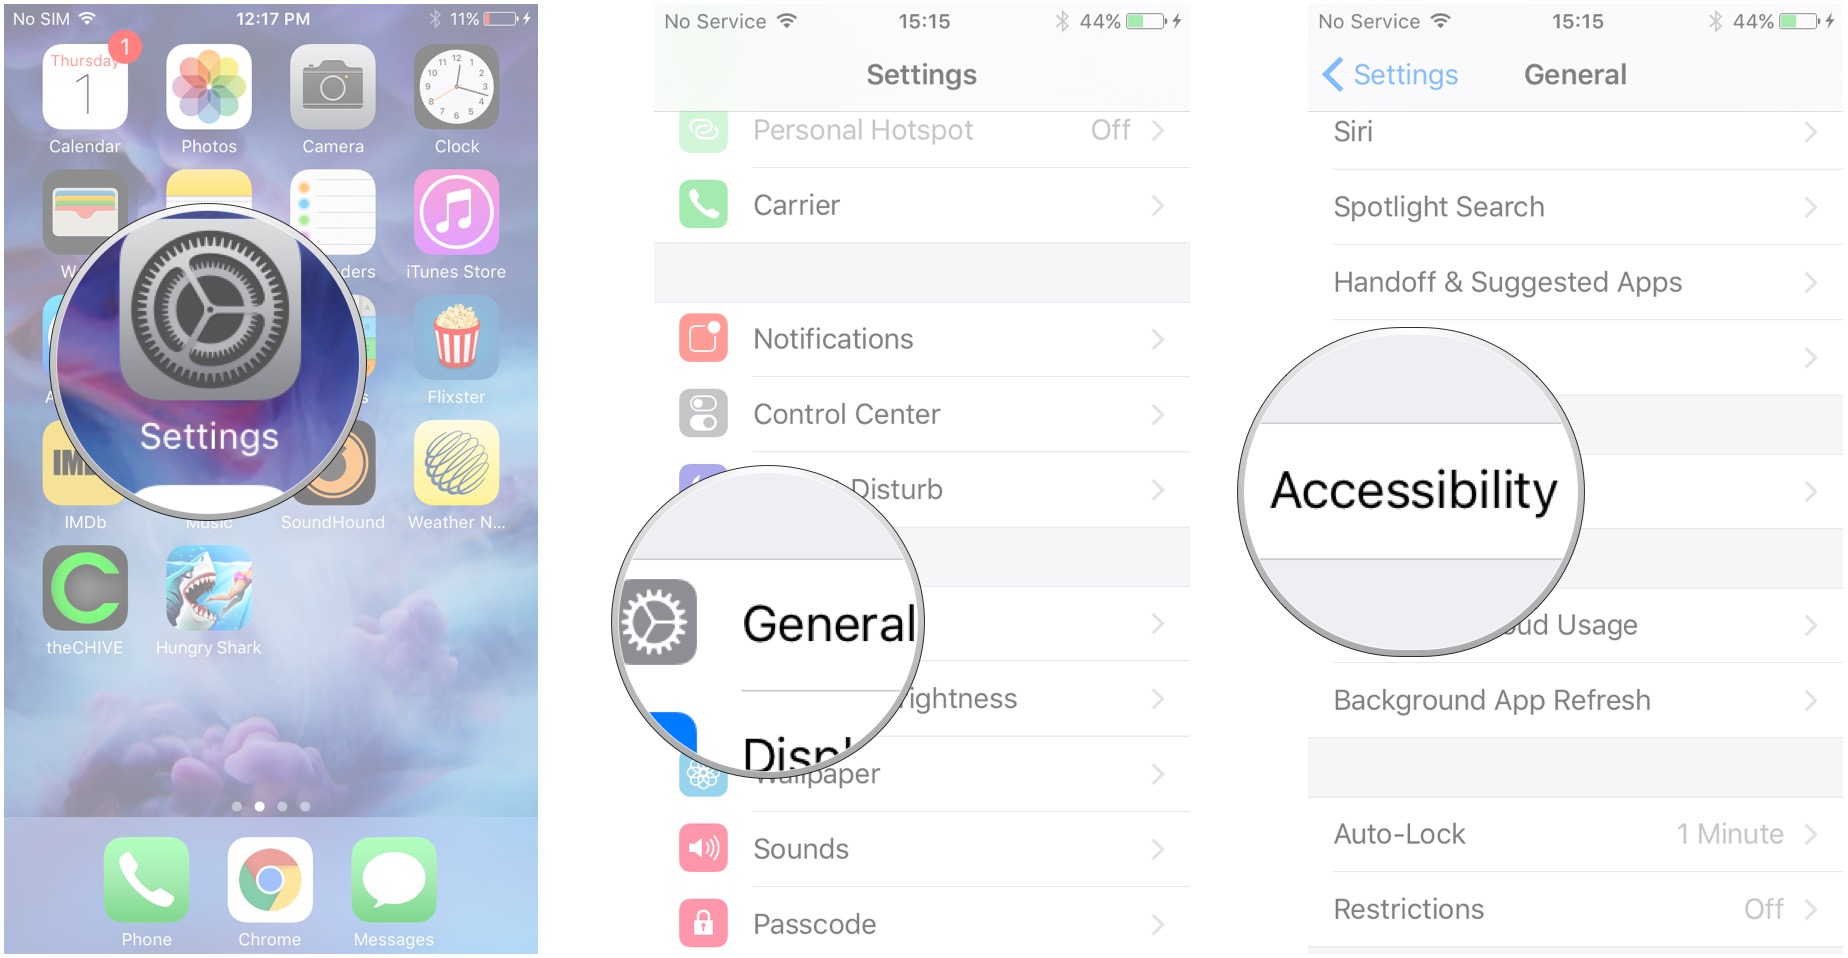 How To Turn On The Led Notification Light On Your Iphone Imore